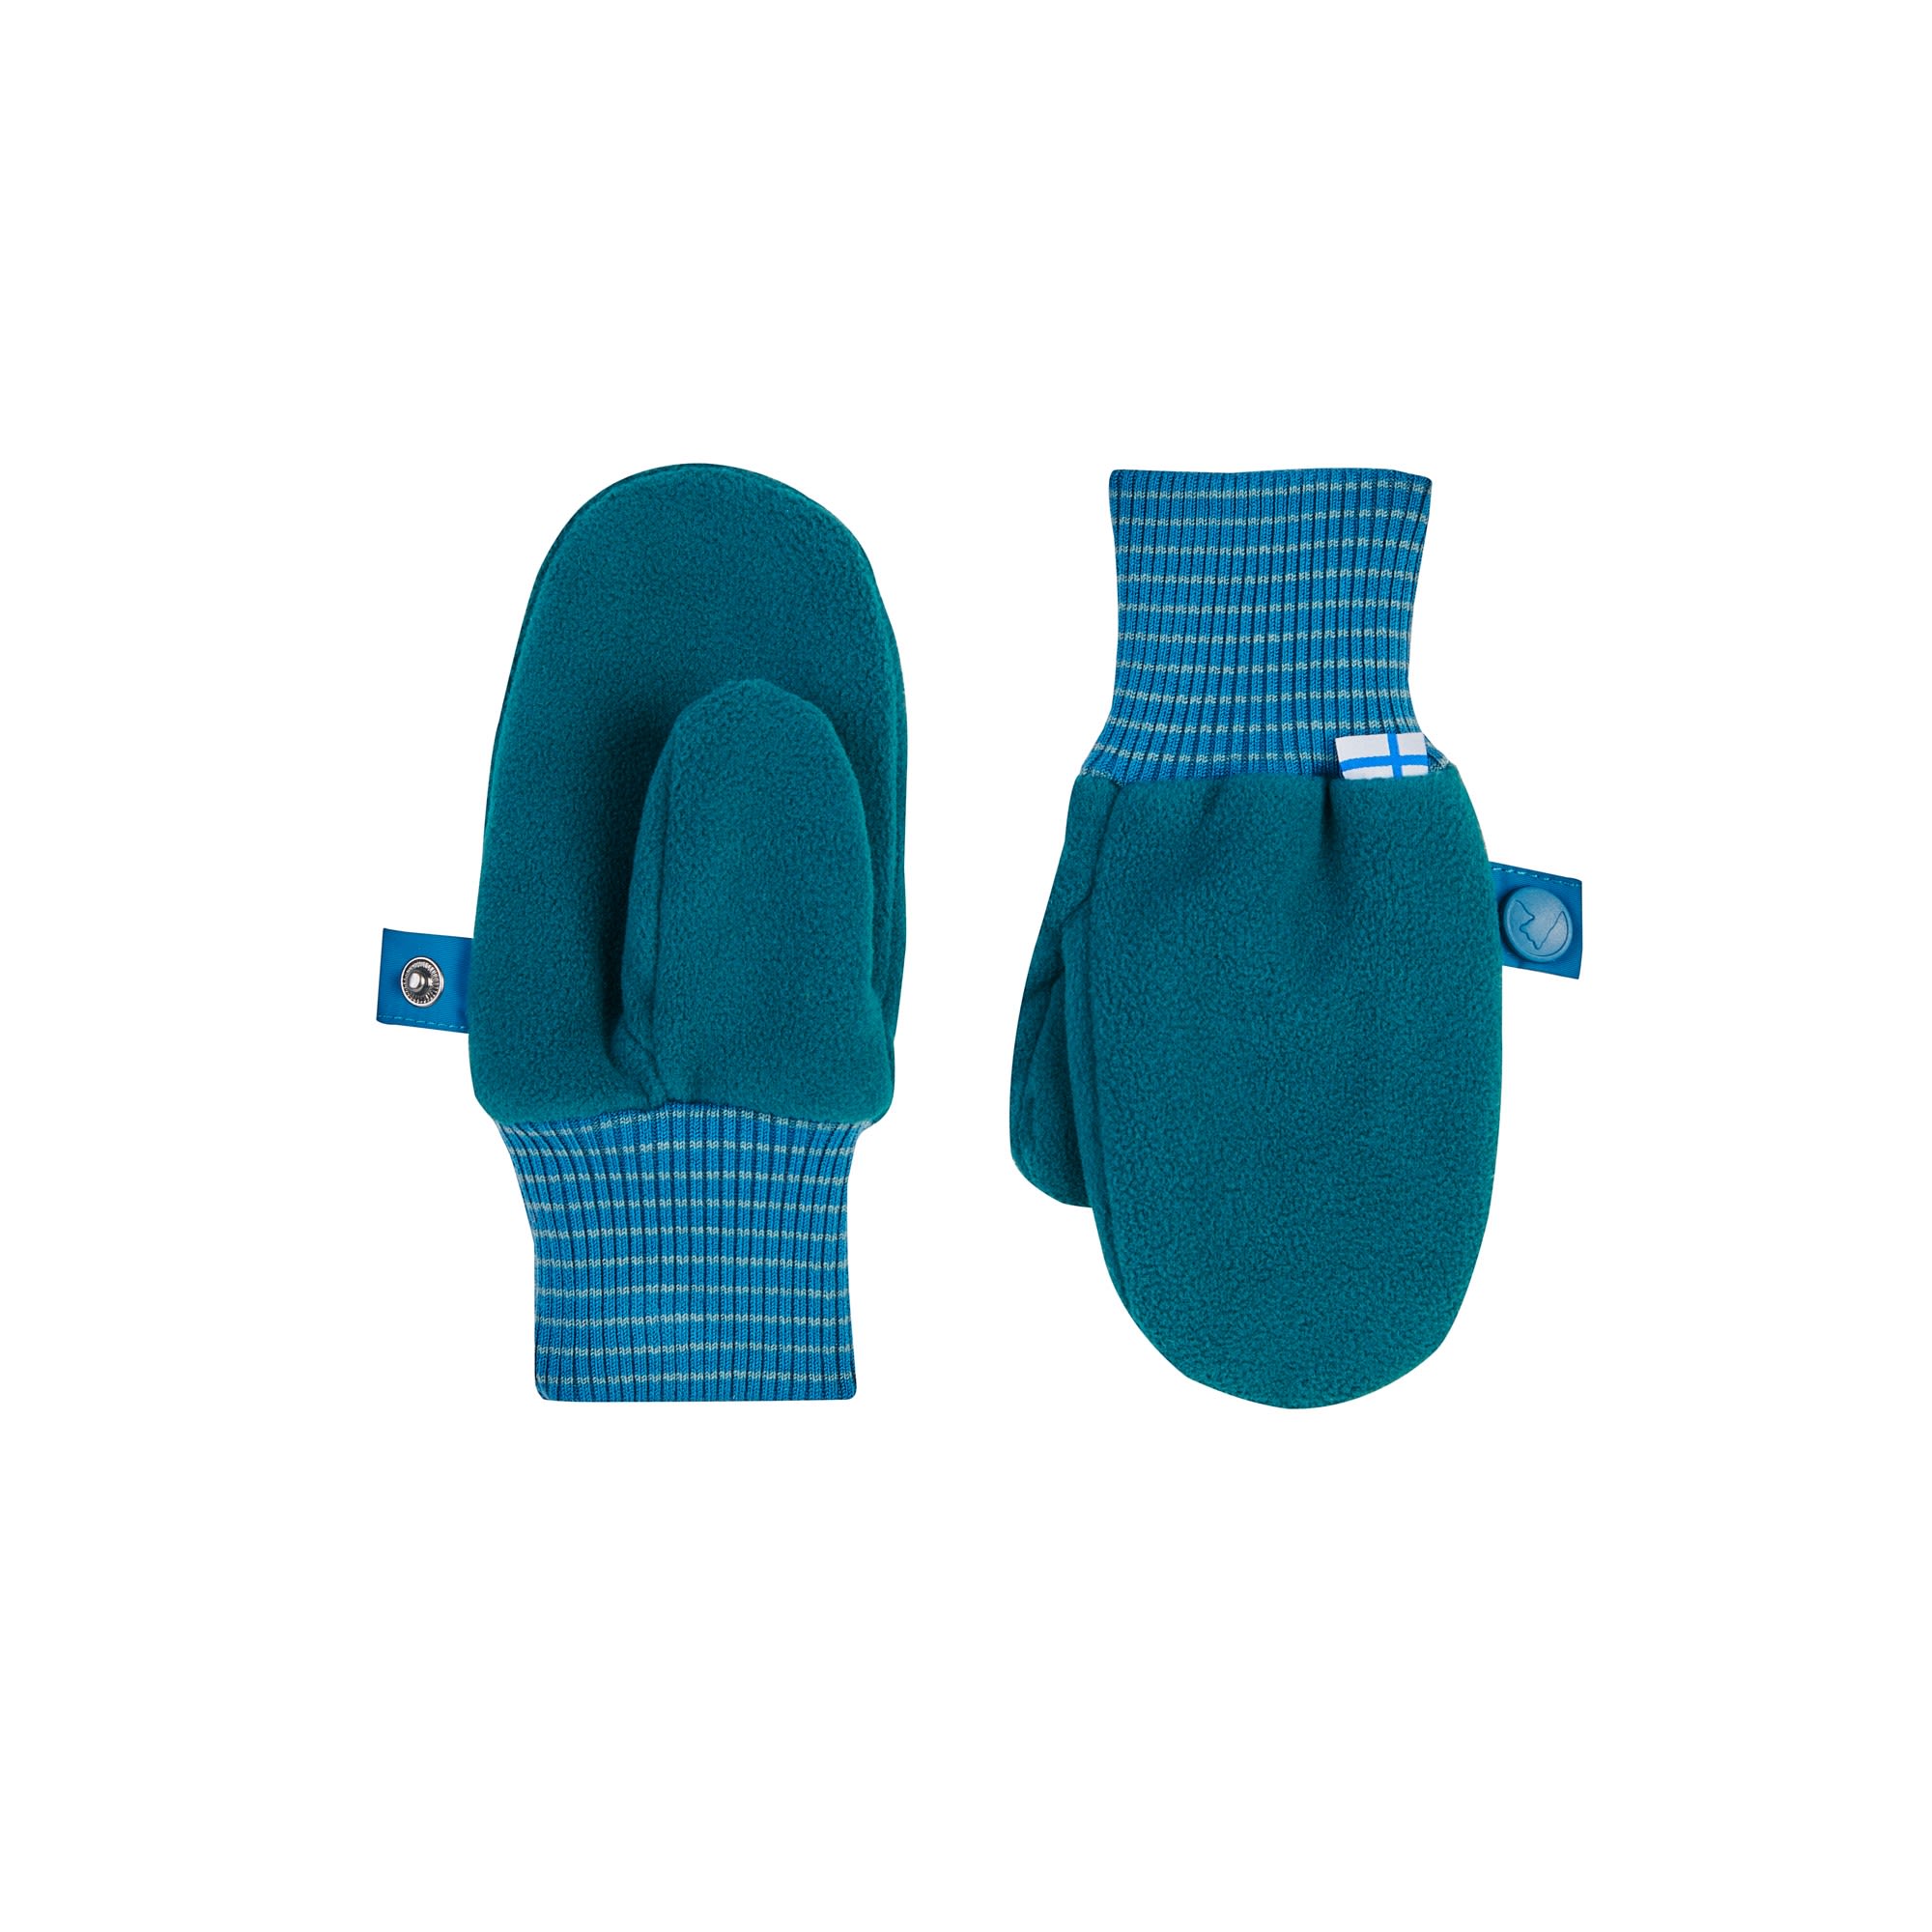 Finkid Pupujussi Blau- Fausthandschuhe- Grsse S - Farbe Deep Teal - Seaport